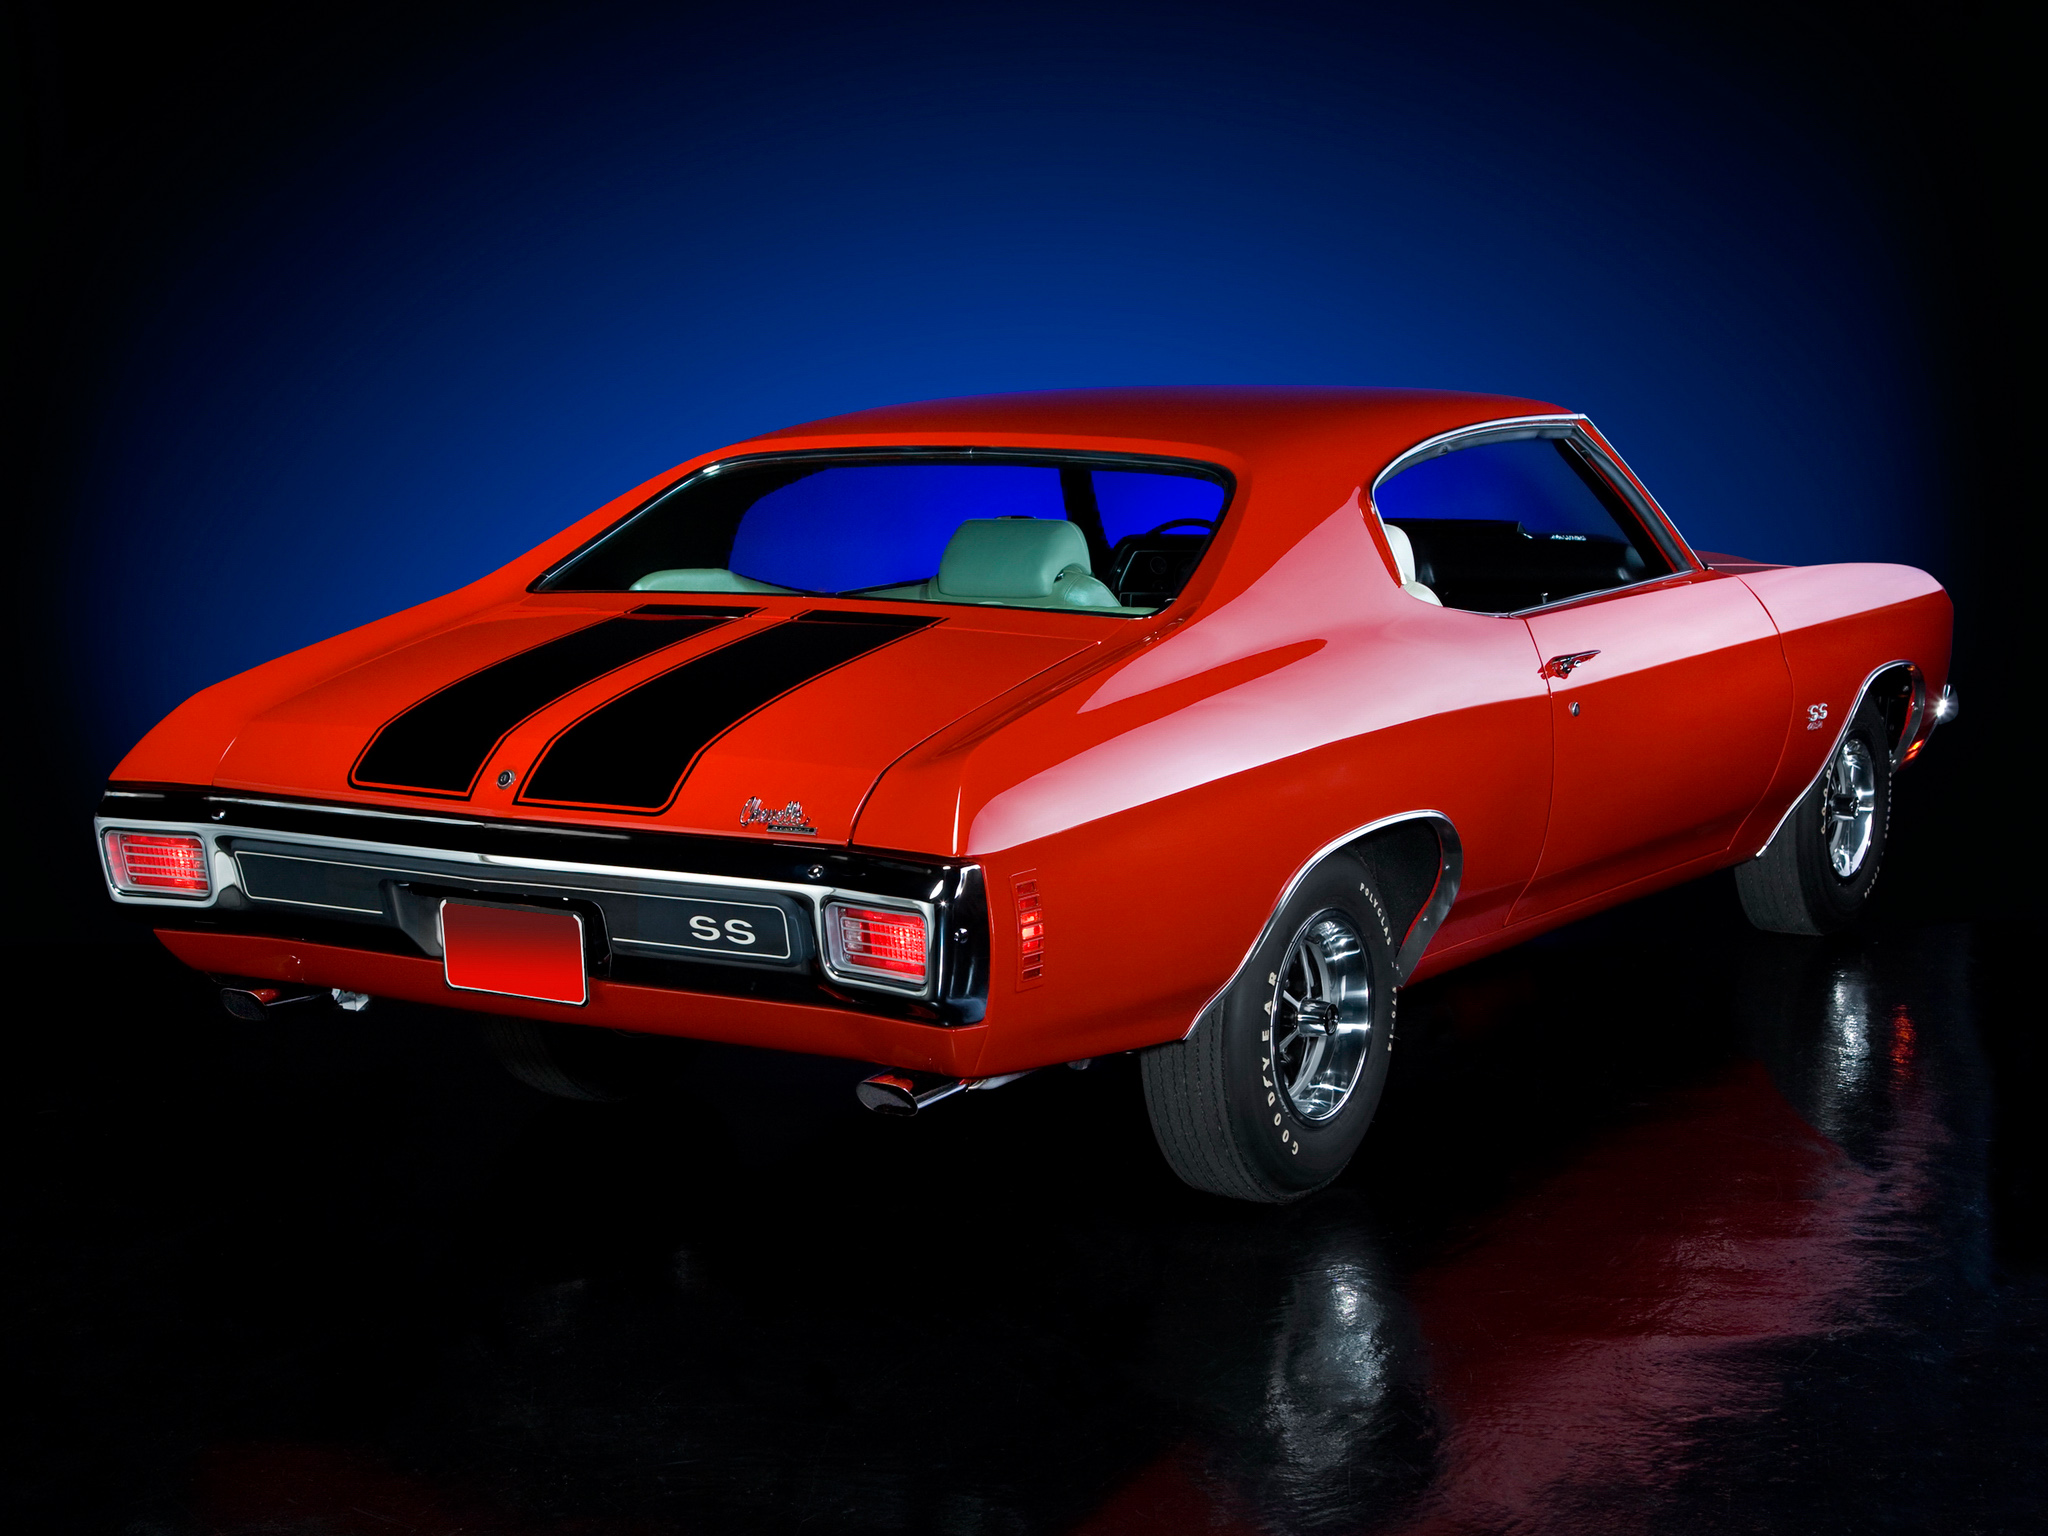 1970, Chevrolet, Chevelle, Ss, 454, Ls6, Hardtop, Coupe, Muscle, Classic, S s, Gh Wallpaper